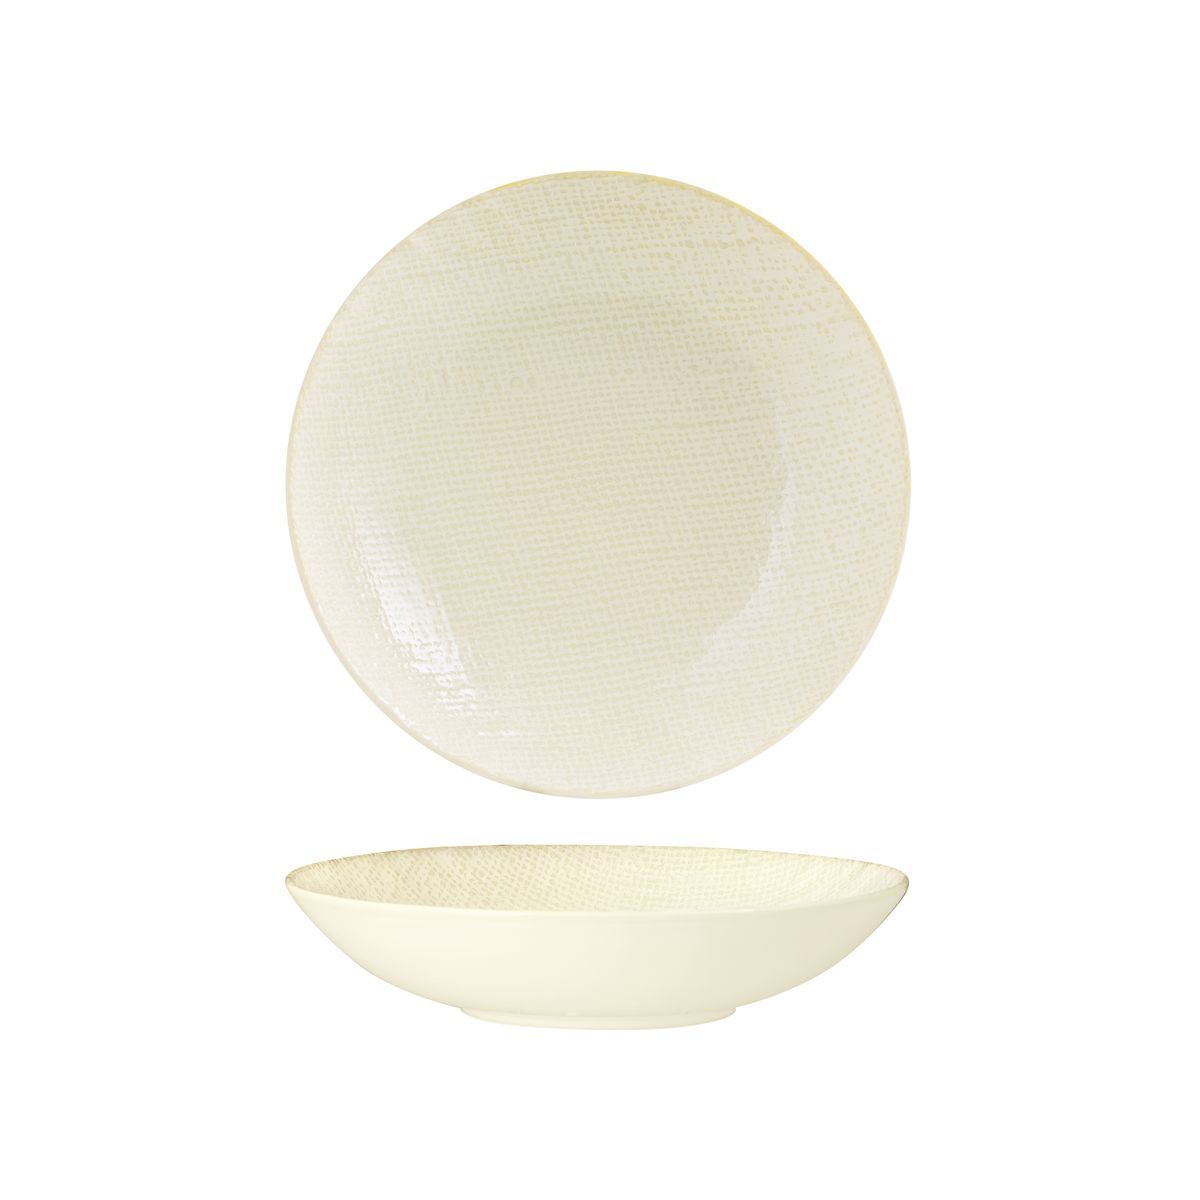 SHARE BOWL-200mm , REACTIVE WHITE from Luzerne. Textured, made out of Ceramic and sold in boxes of 1. Hospitality quality at wholesale price with The Flying Fork! 